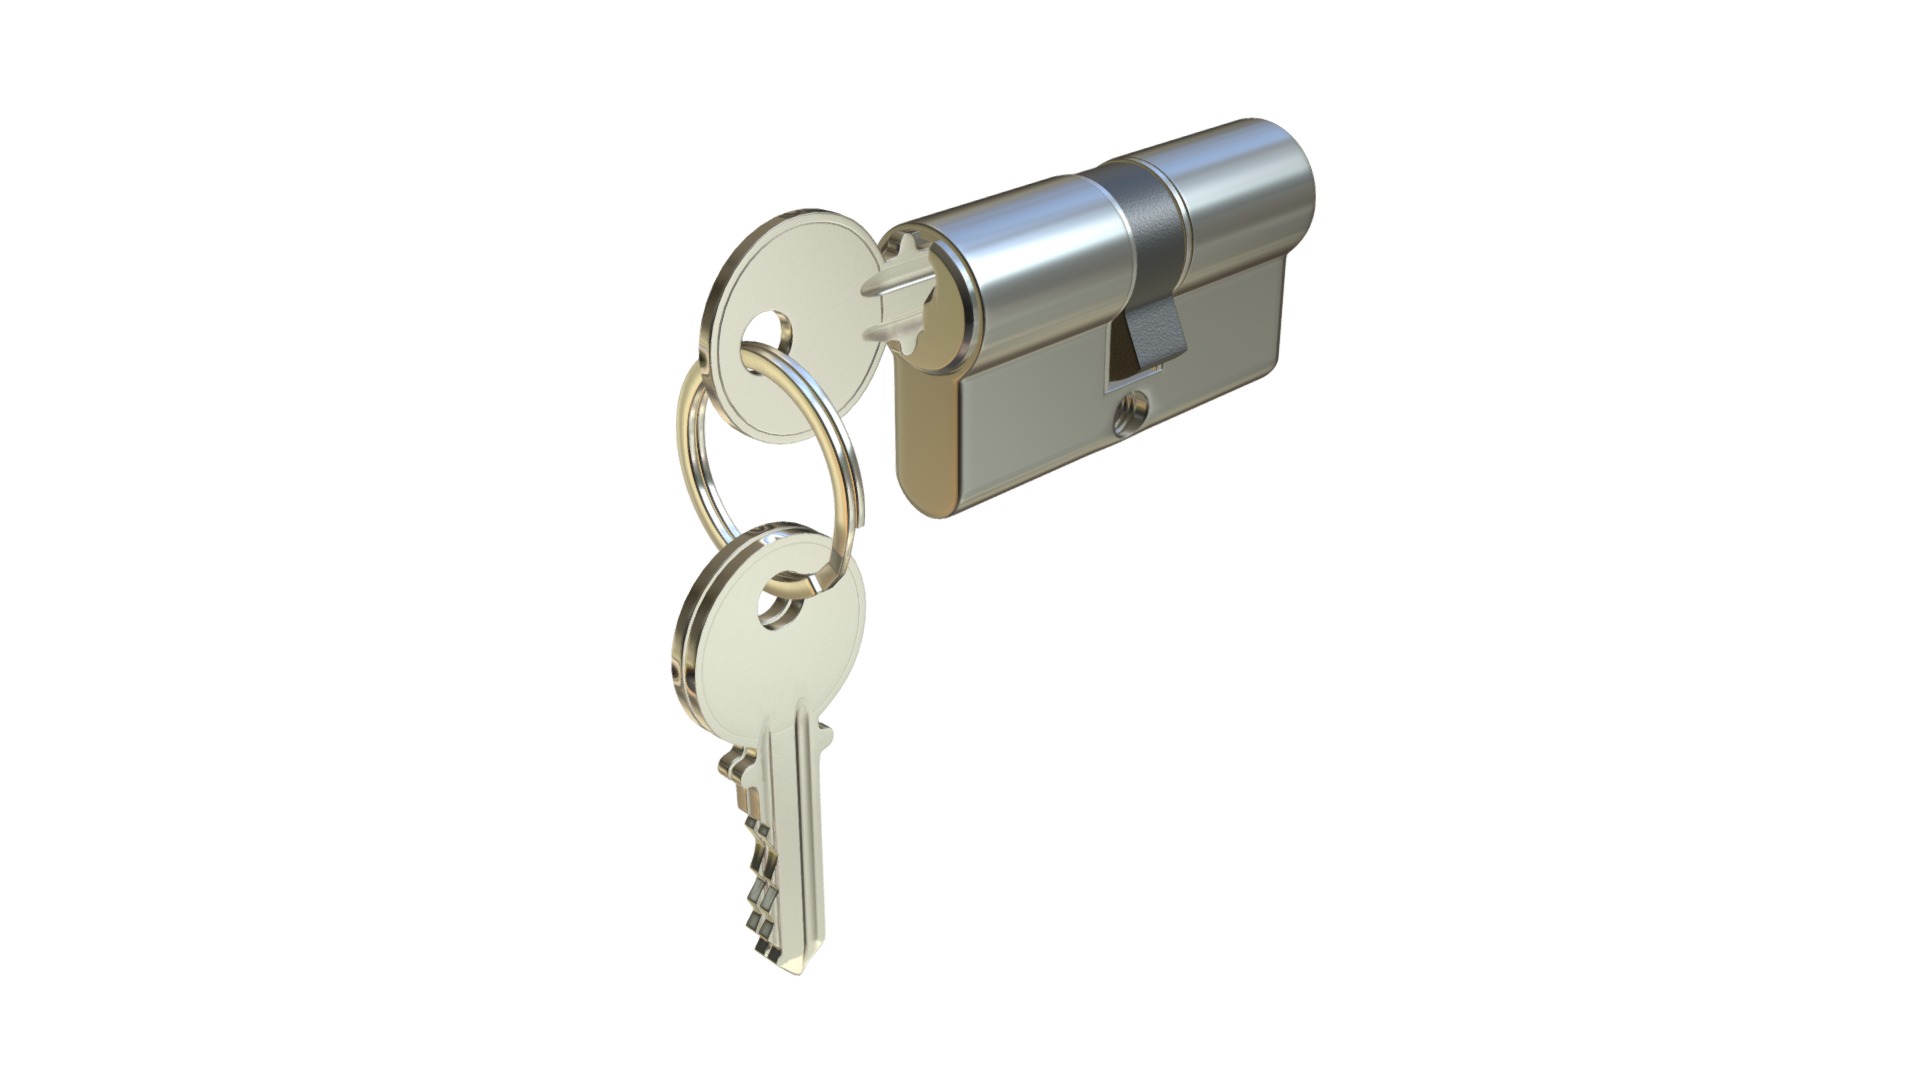 3D model Euro Profile Cylinder Barrel Lock with keys - This is a 3D model of the Euro Profile Cylinder Barrel Lock with keys. The 3D model is about diagram, engineering drawing.